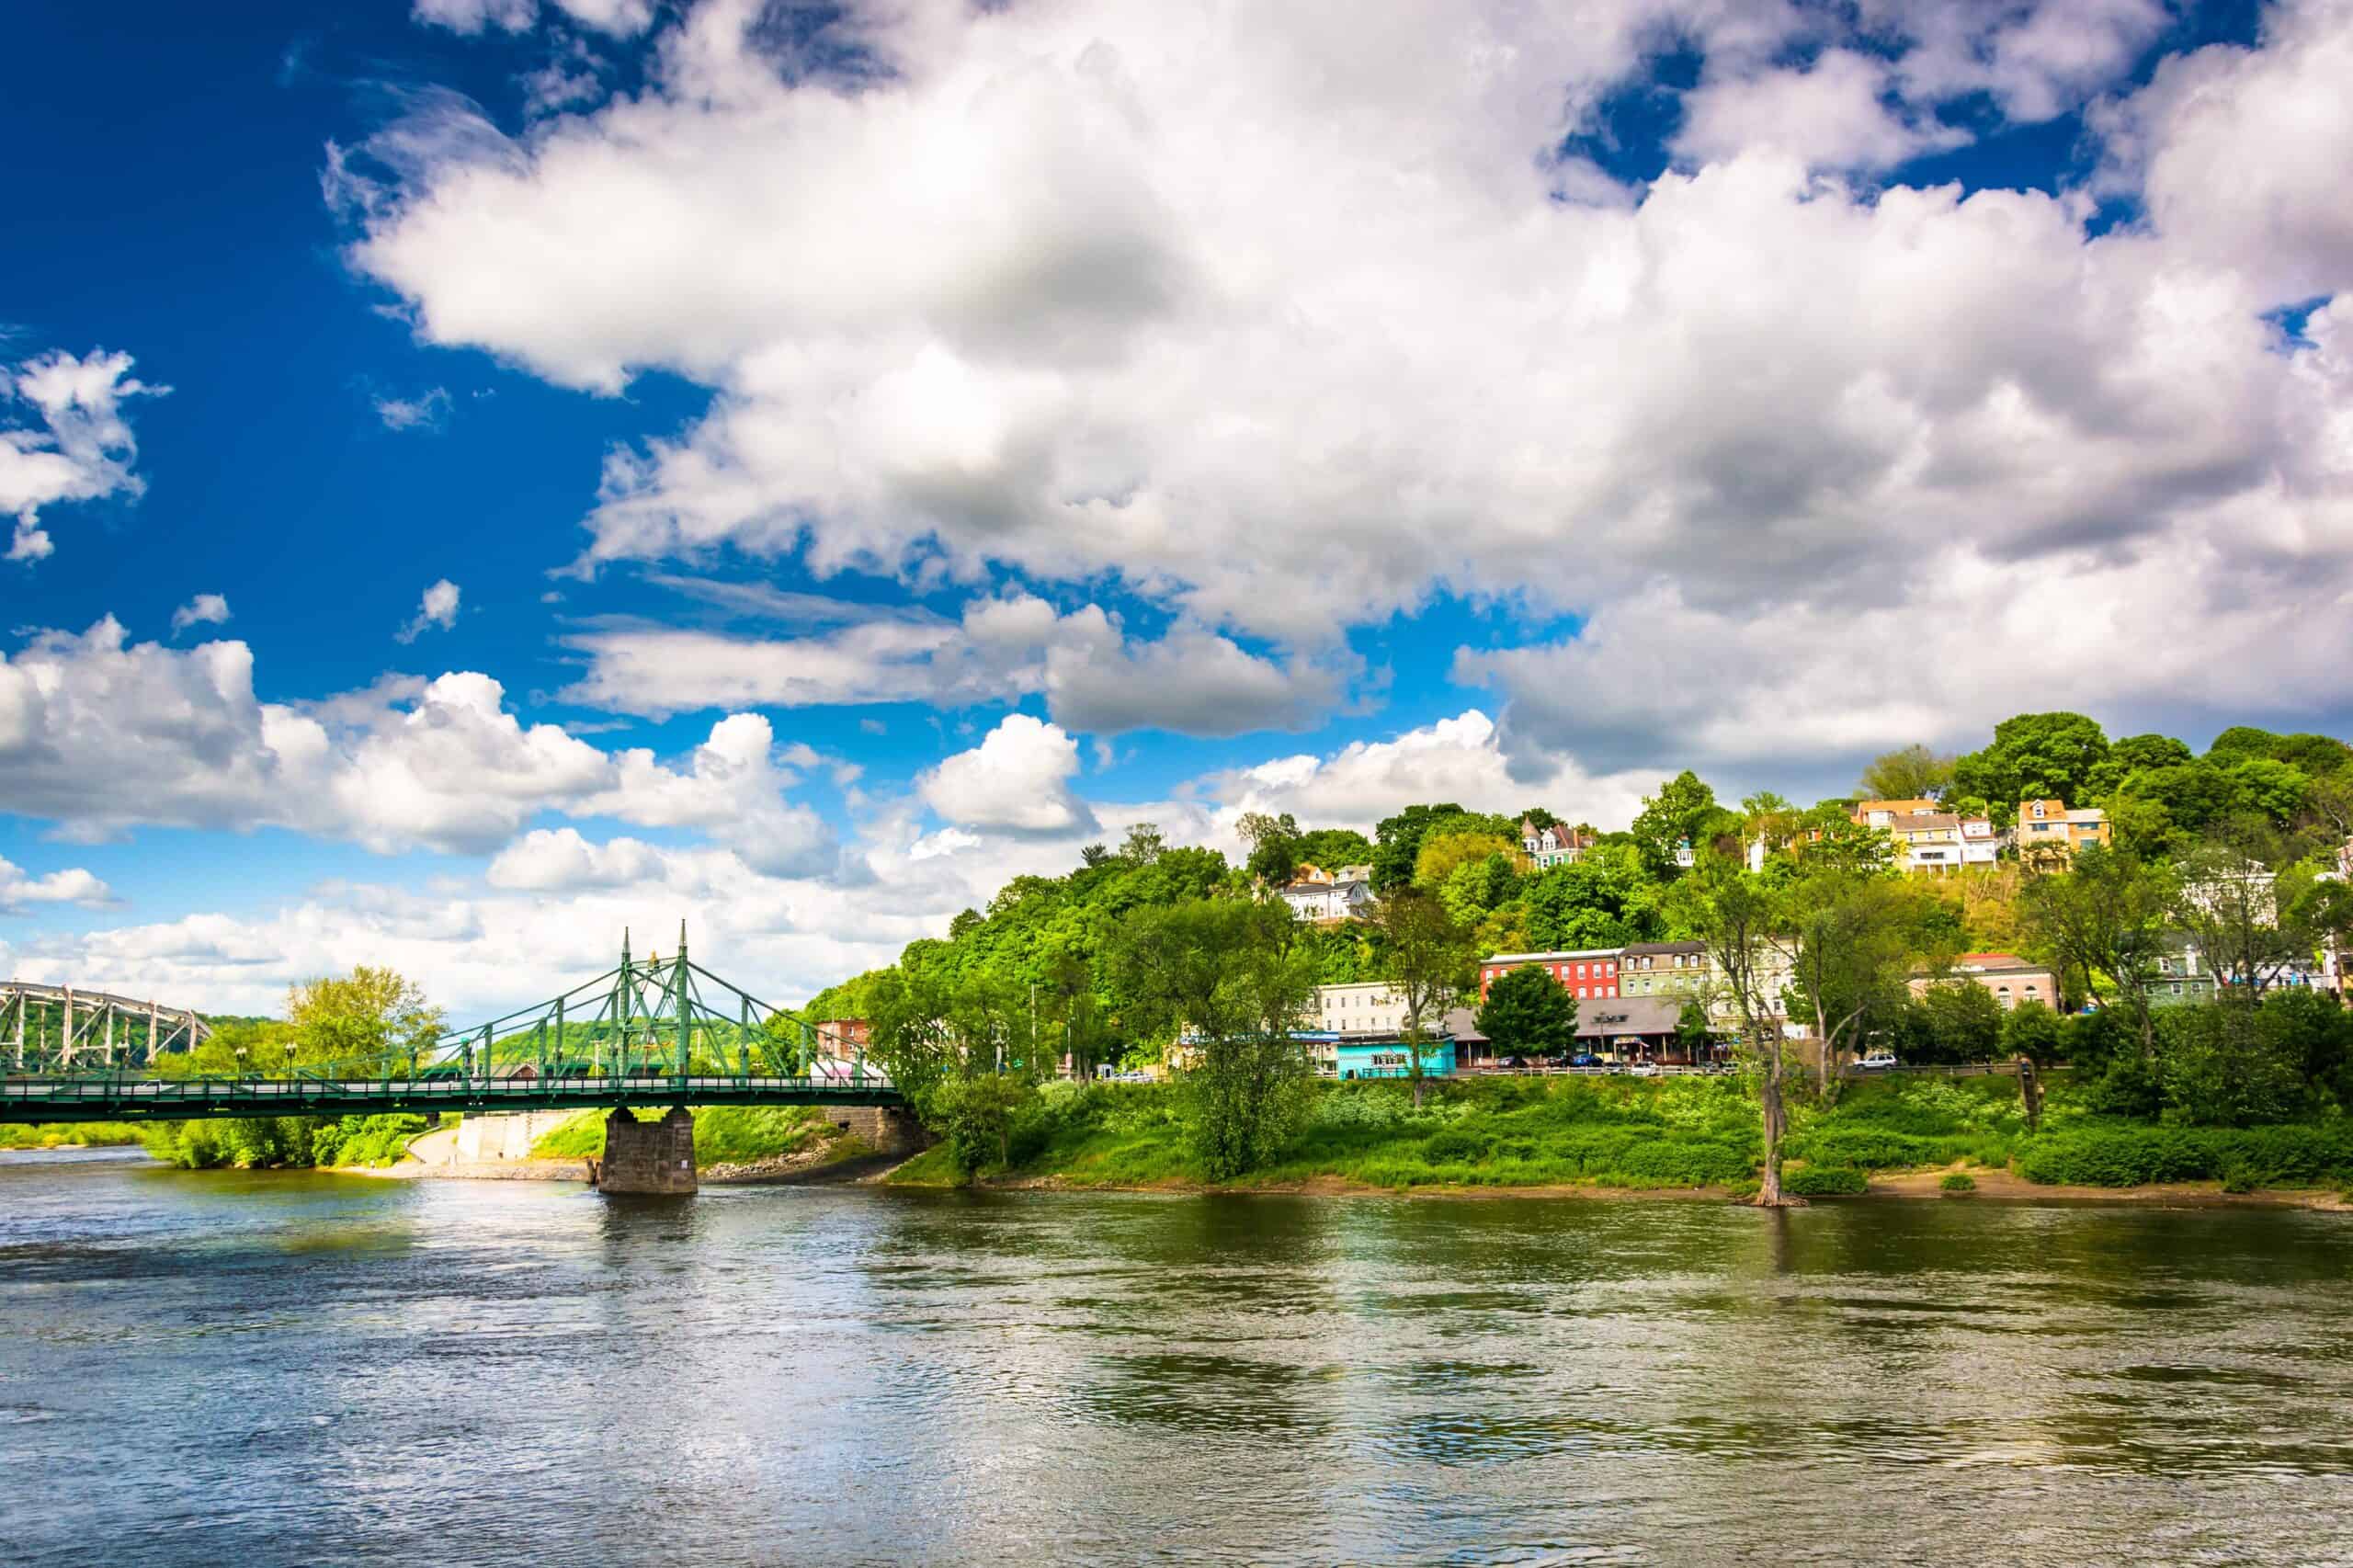 Phillipsburg, New Jersey | Phillipsburg, New Jersey, seen across the Delaware River from Ea